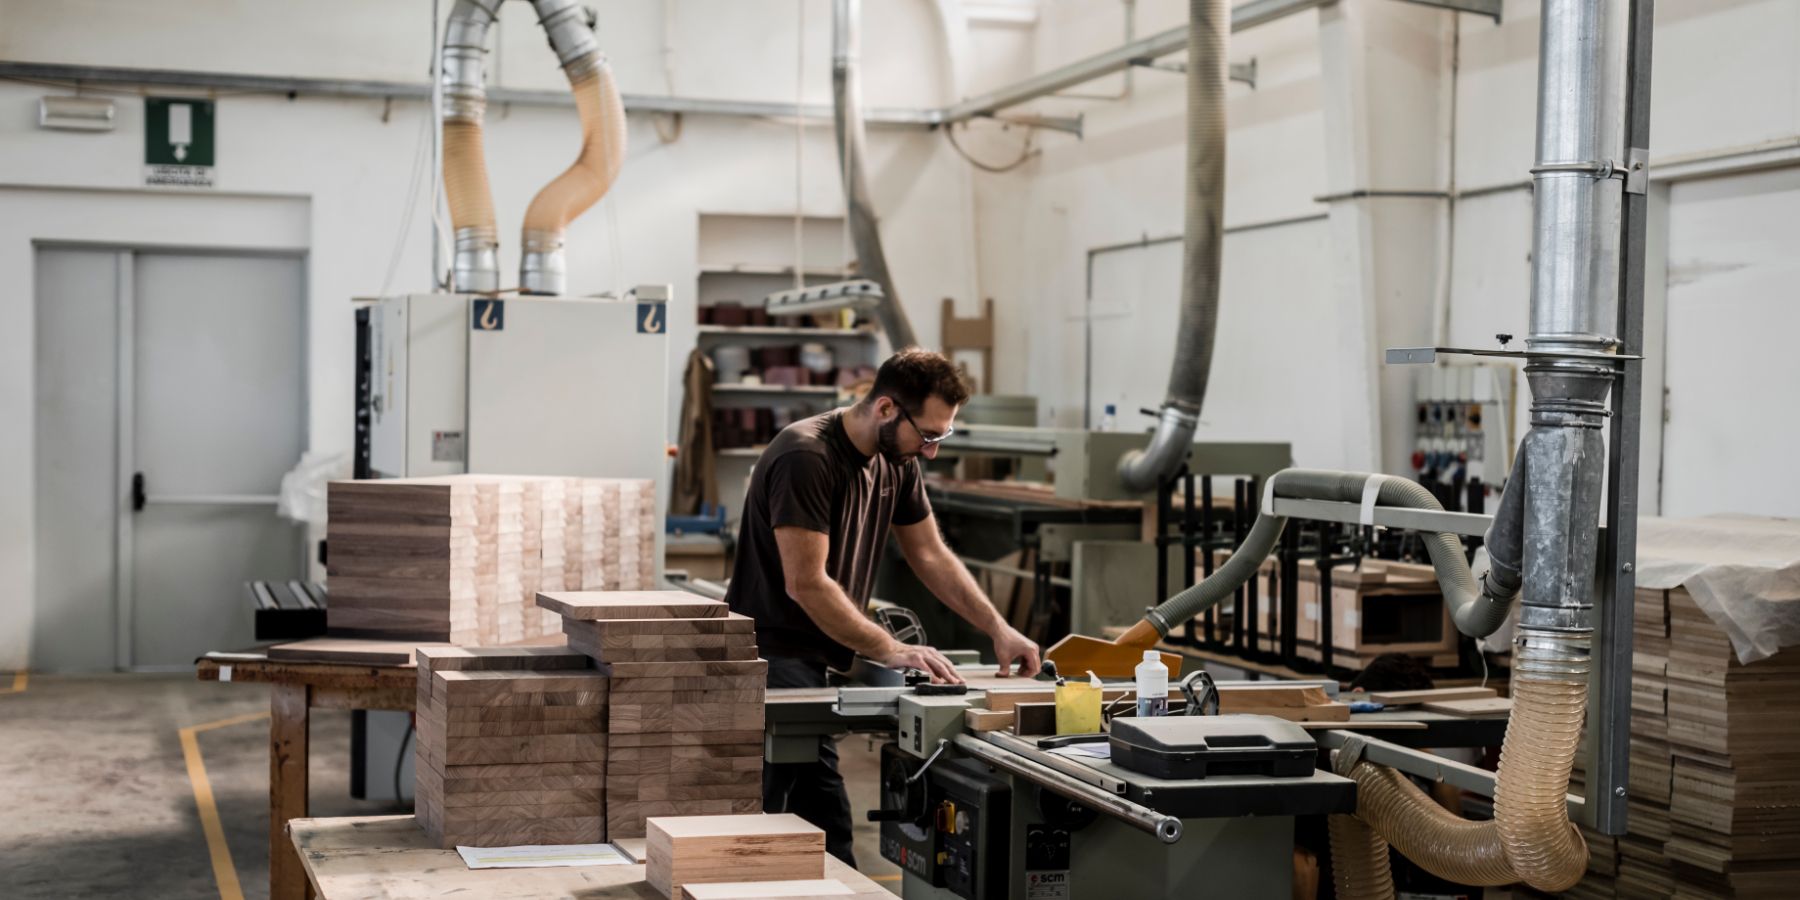 Sonus faber acquires long-term woodworking facility